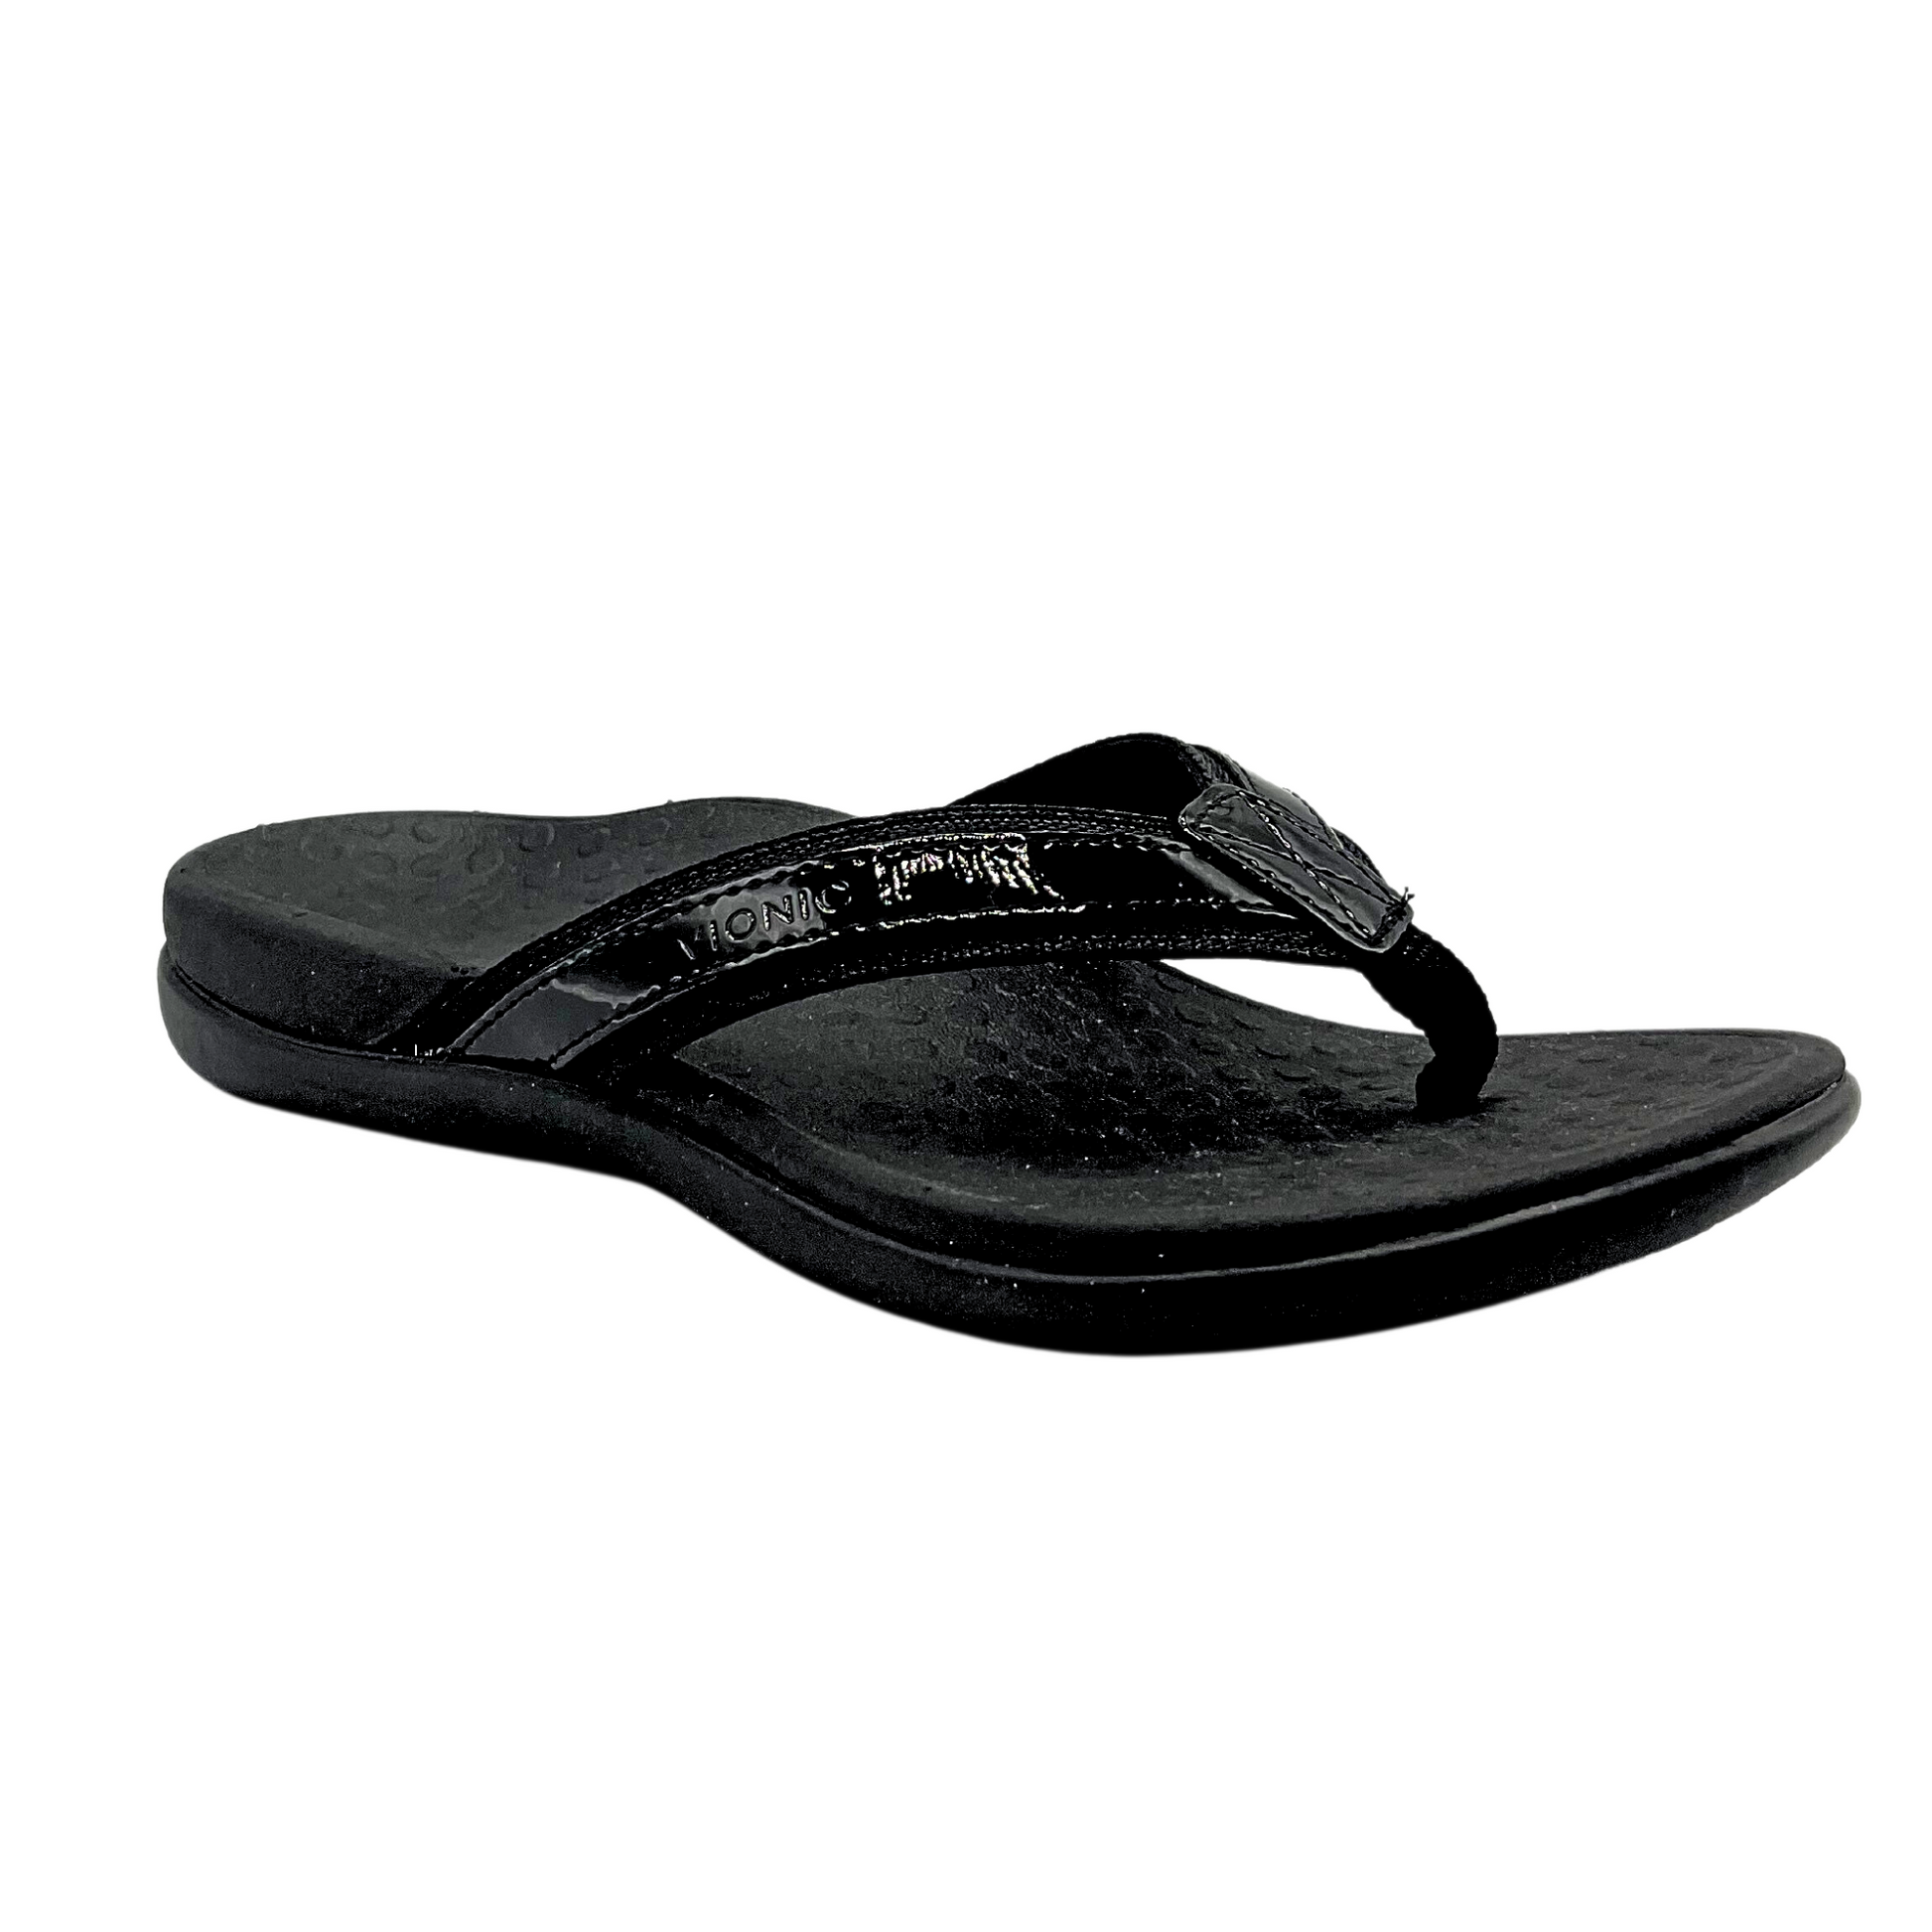 Outside view of a flip flop sandal in black.  Toe post and wide straps